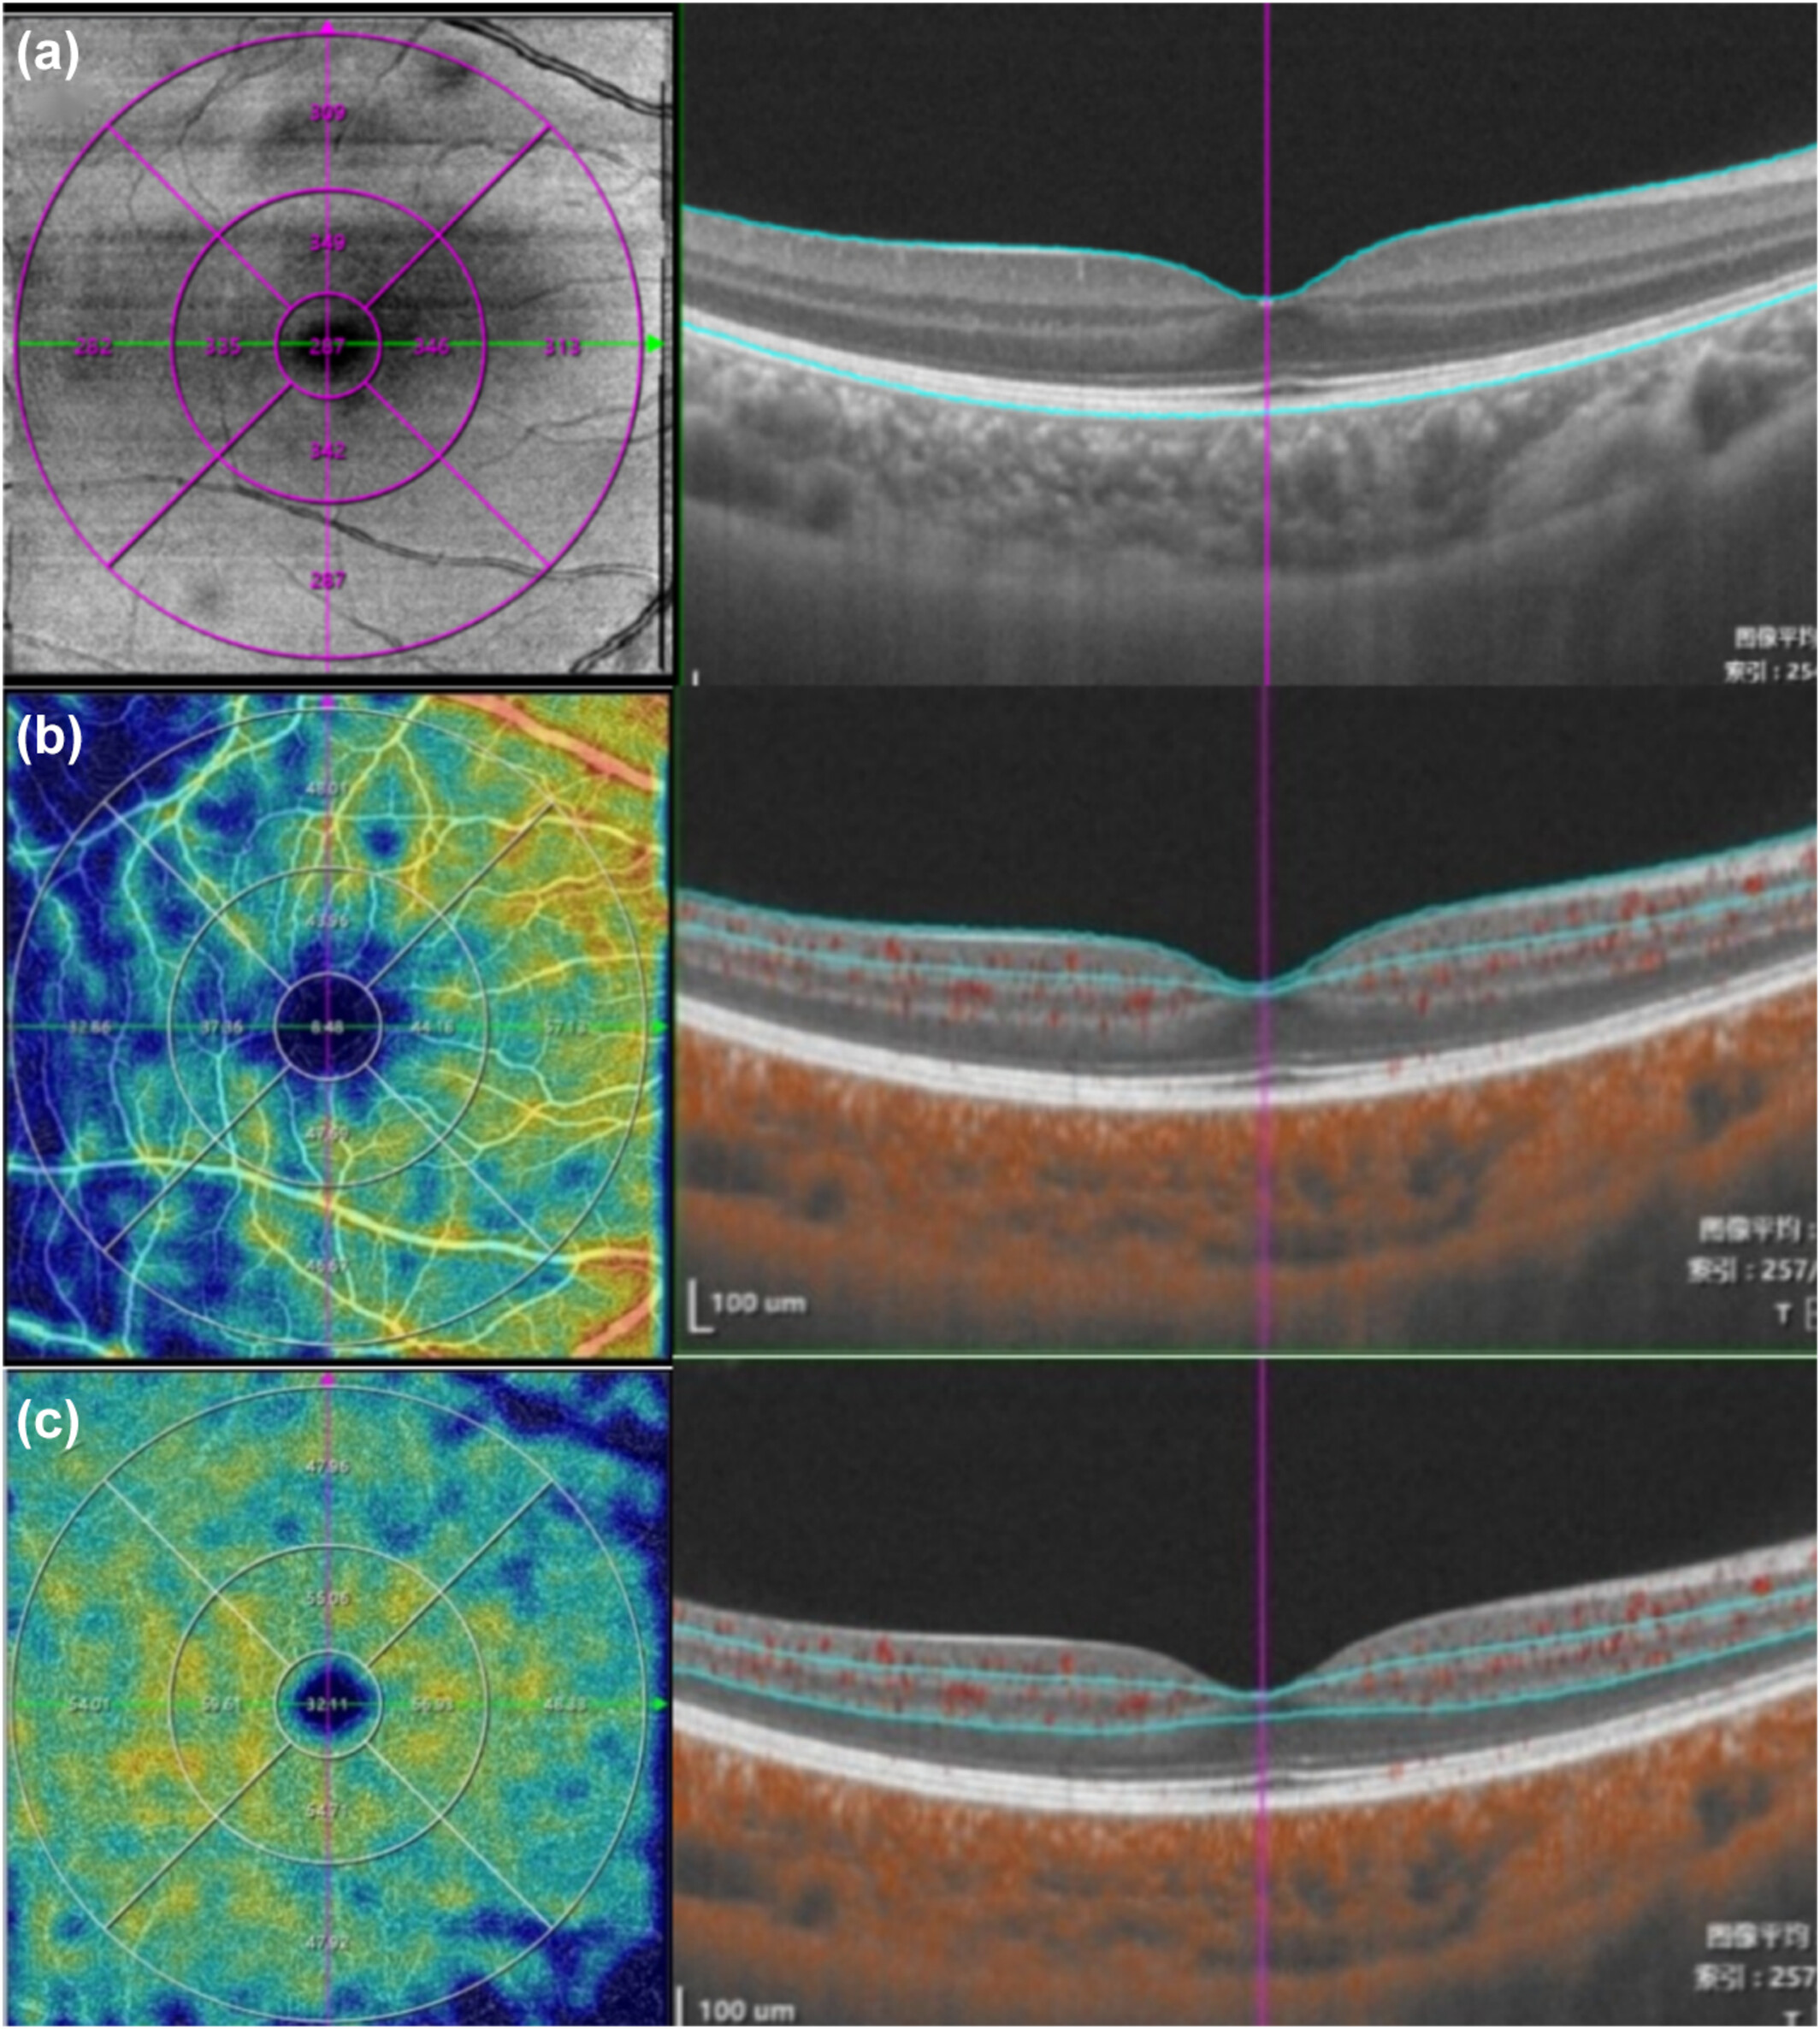 Pediatric axial myopic progression was associated with a decrease in choroidal thickness and retinal thickness in the parafoveal and perifoveal regions, while retinal thickness remained unchanged in the foveal area. This image from the study shows the segmentation of (a) total retinal thickness (b), superficial retinal vascular density and (c) deep retinal vascular density.